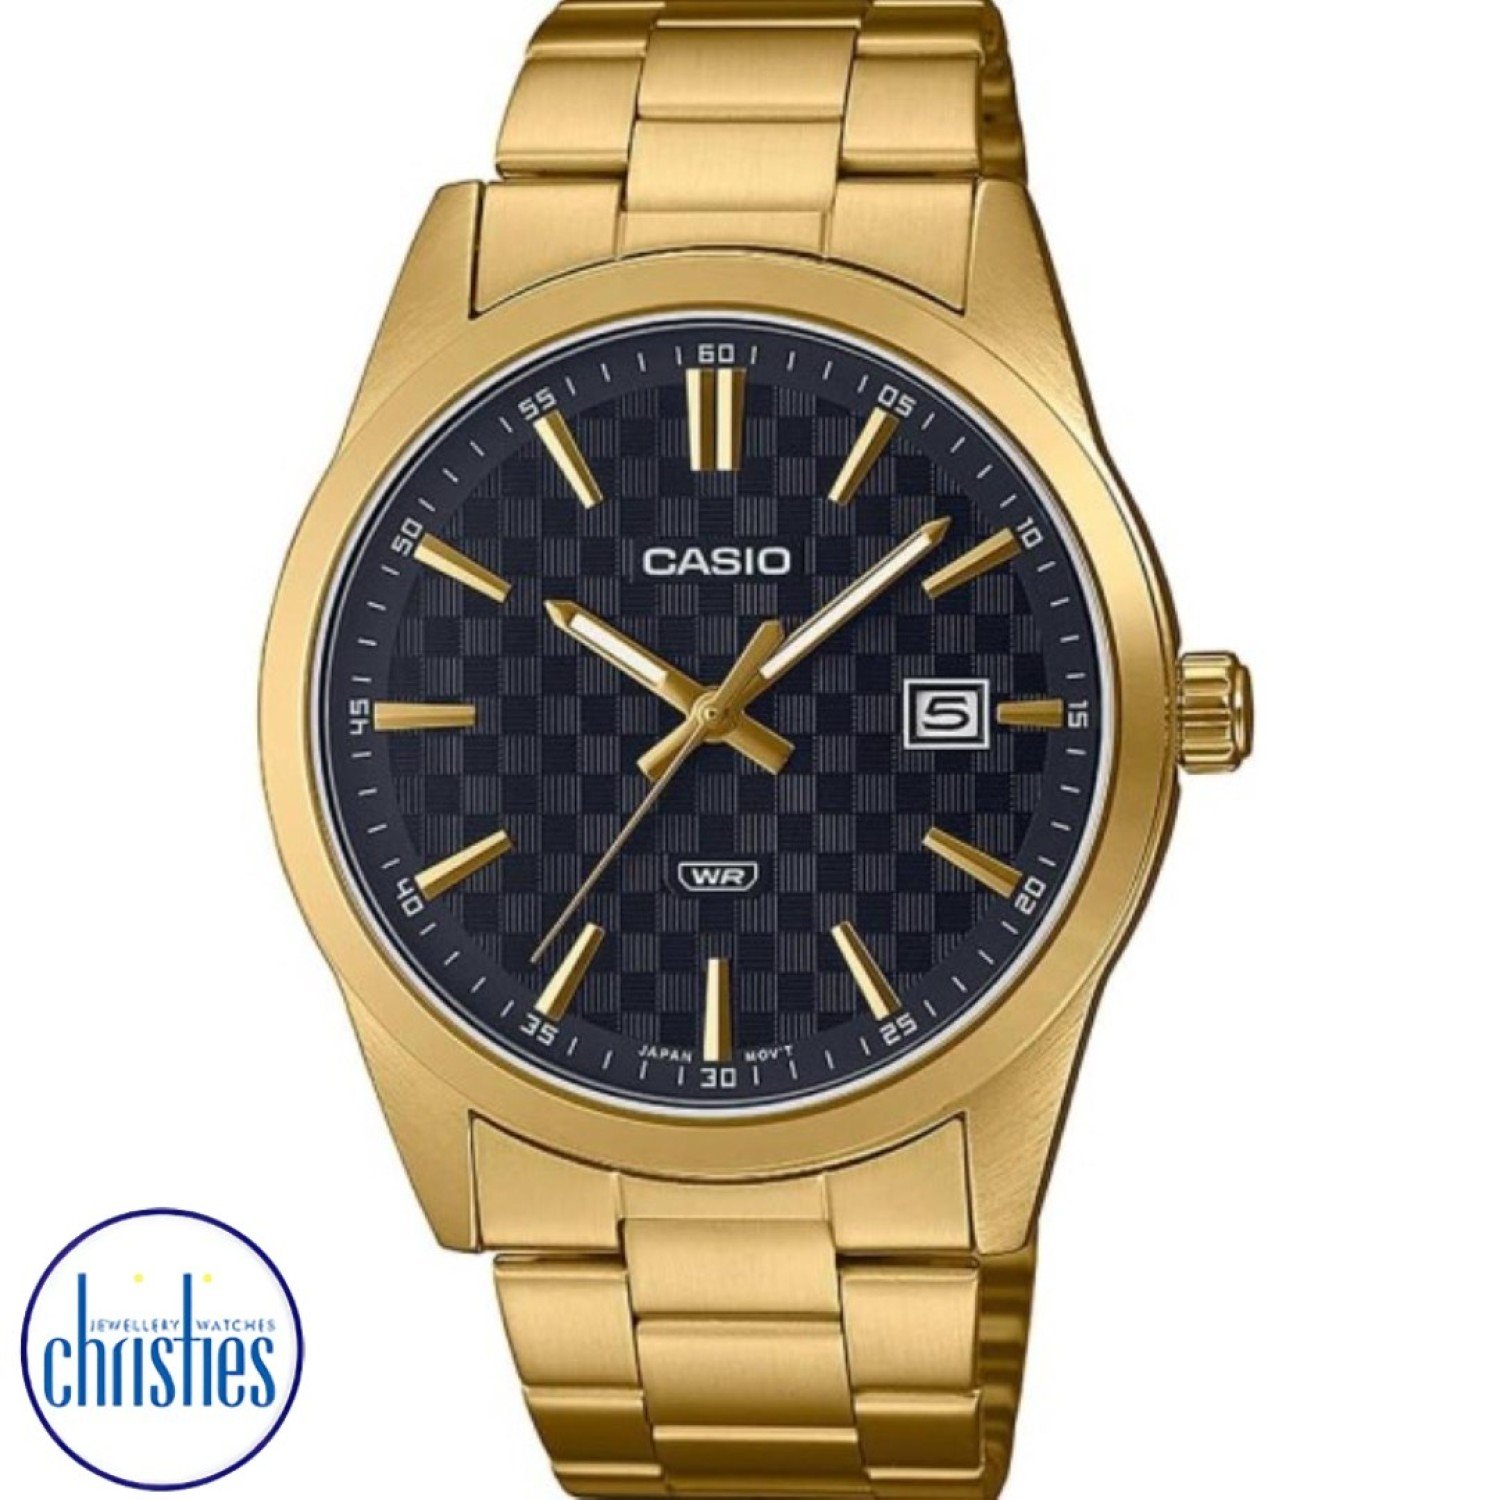 MTPVD03G-1A Casio Black Dial Watch MTPVD03G-1A Casio New Zealand and Auckland - Free Delivery - Afterpay, Laybuy and Zip  the easy way to pay - Cheap Casio Watches Auckland